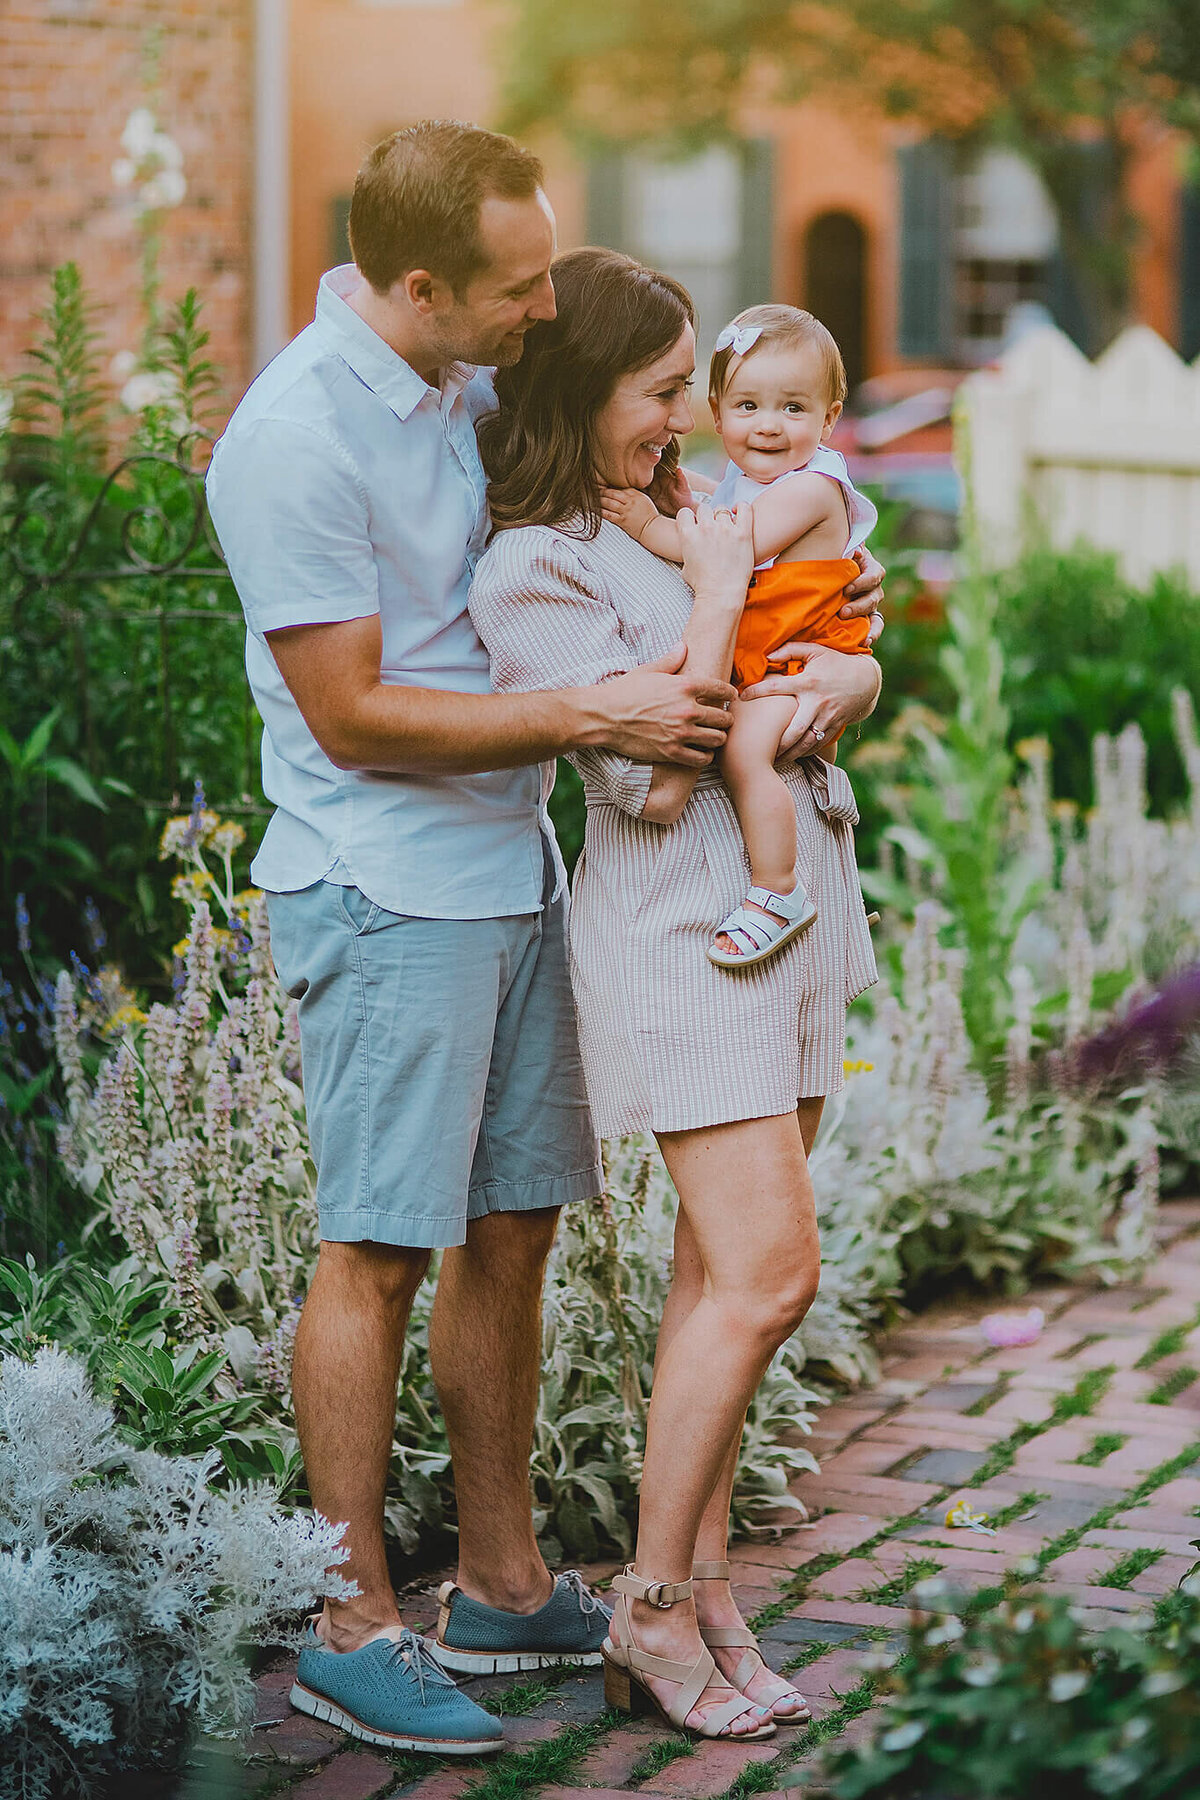 Mother and father smiling and hugging a baby girl in orange shorts in a garden in Fells Point Baltimore Maryland